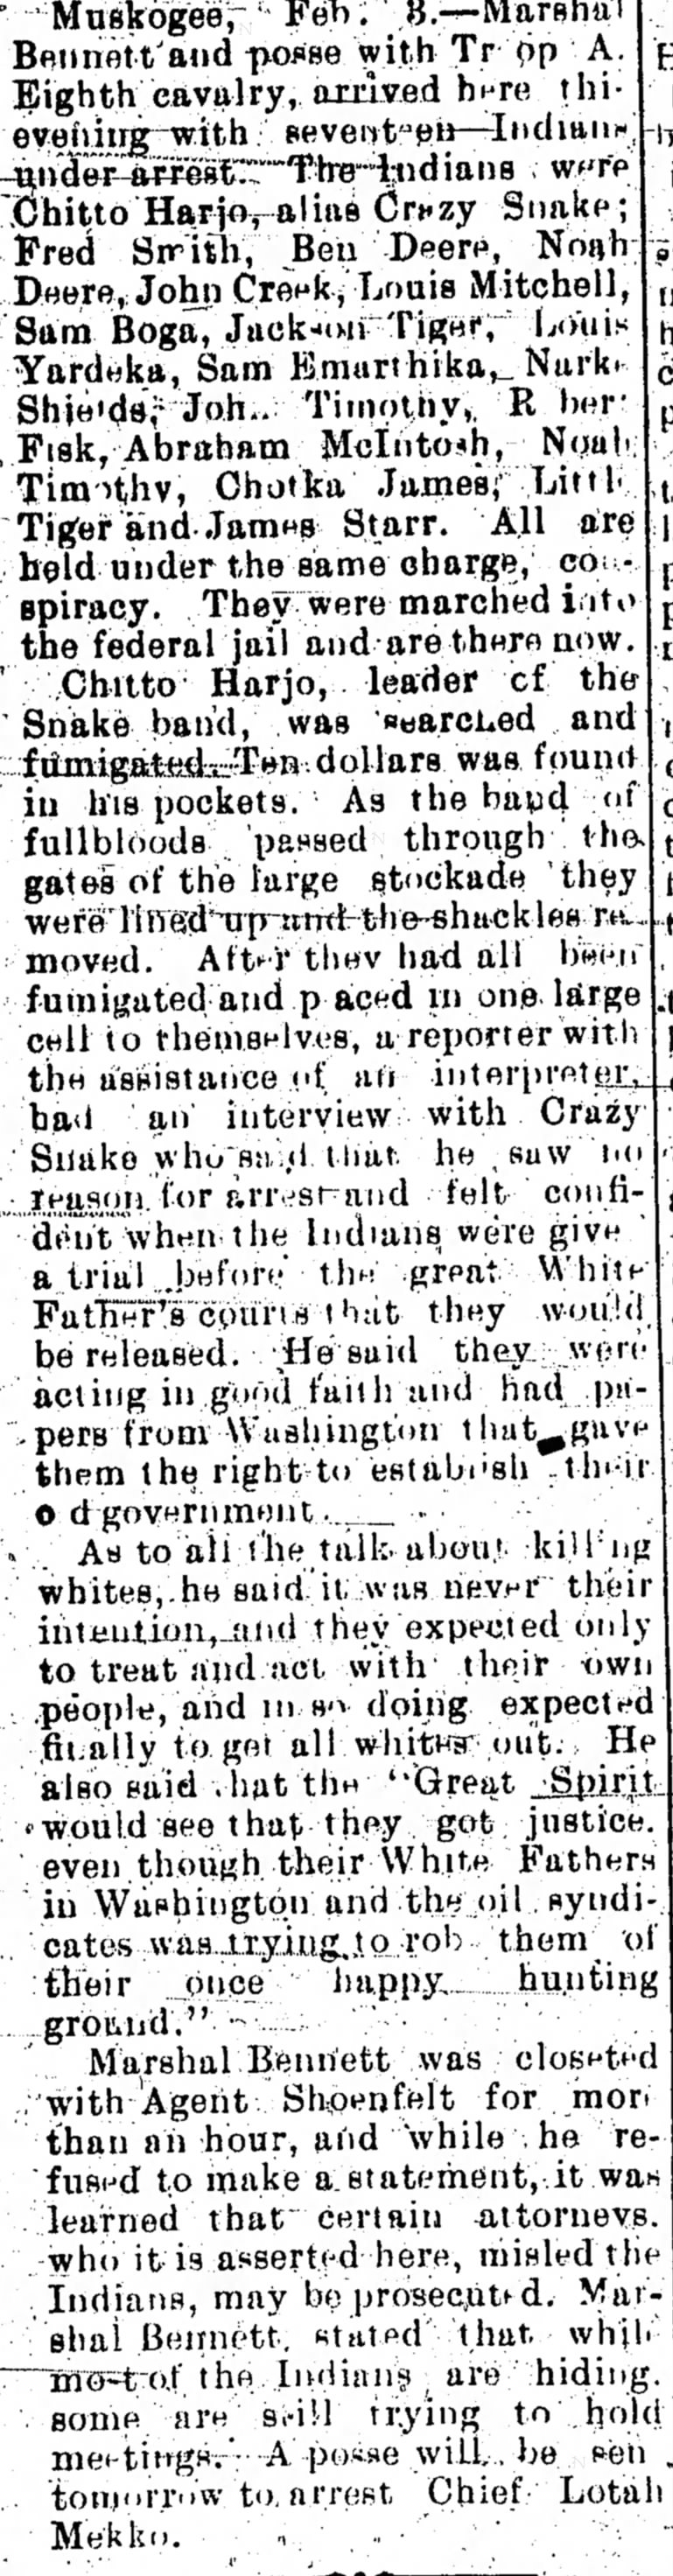 The Indian Journal 8 Feb 1901 p. 3  Noah Deere with Chitto Harjo